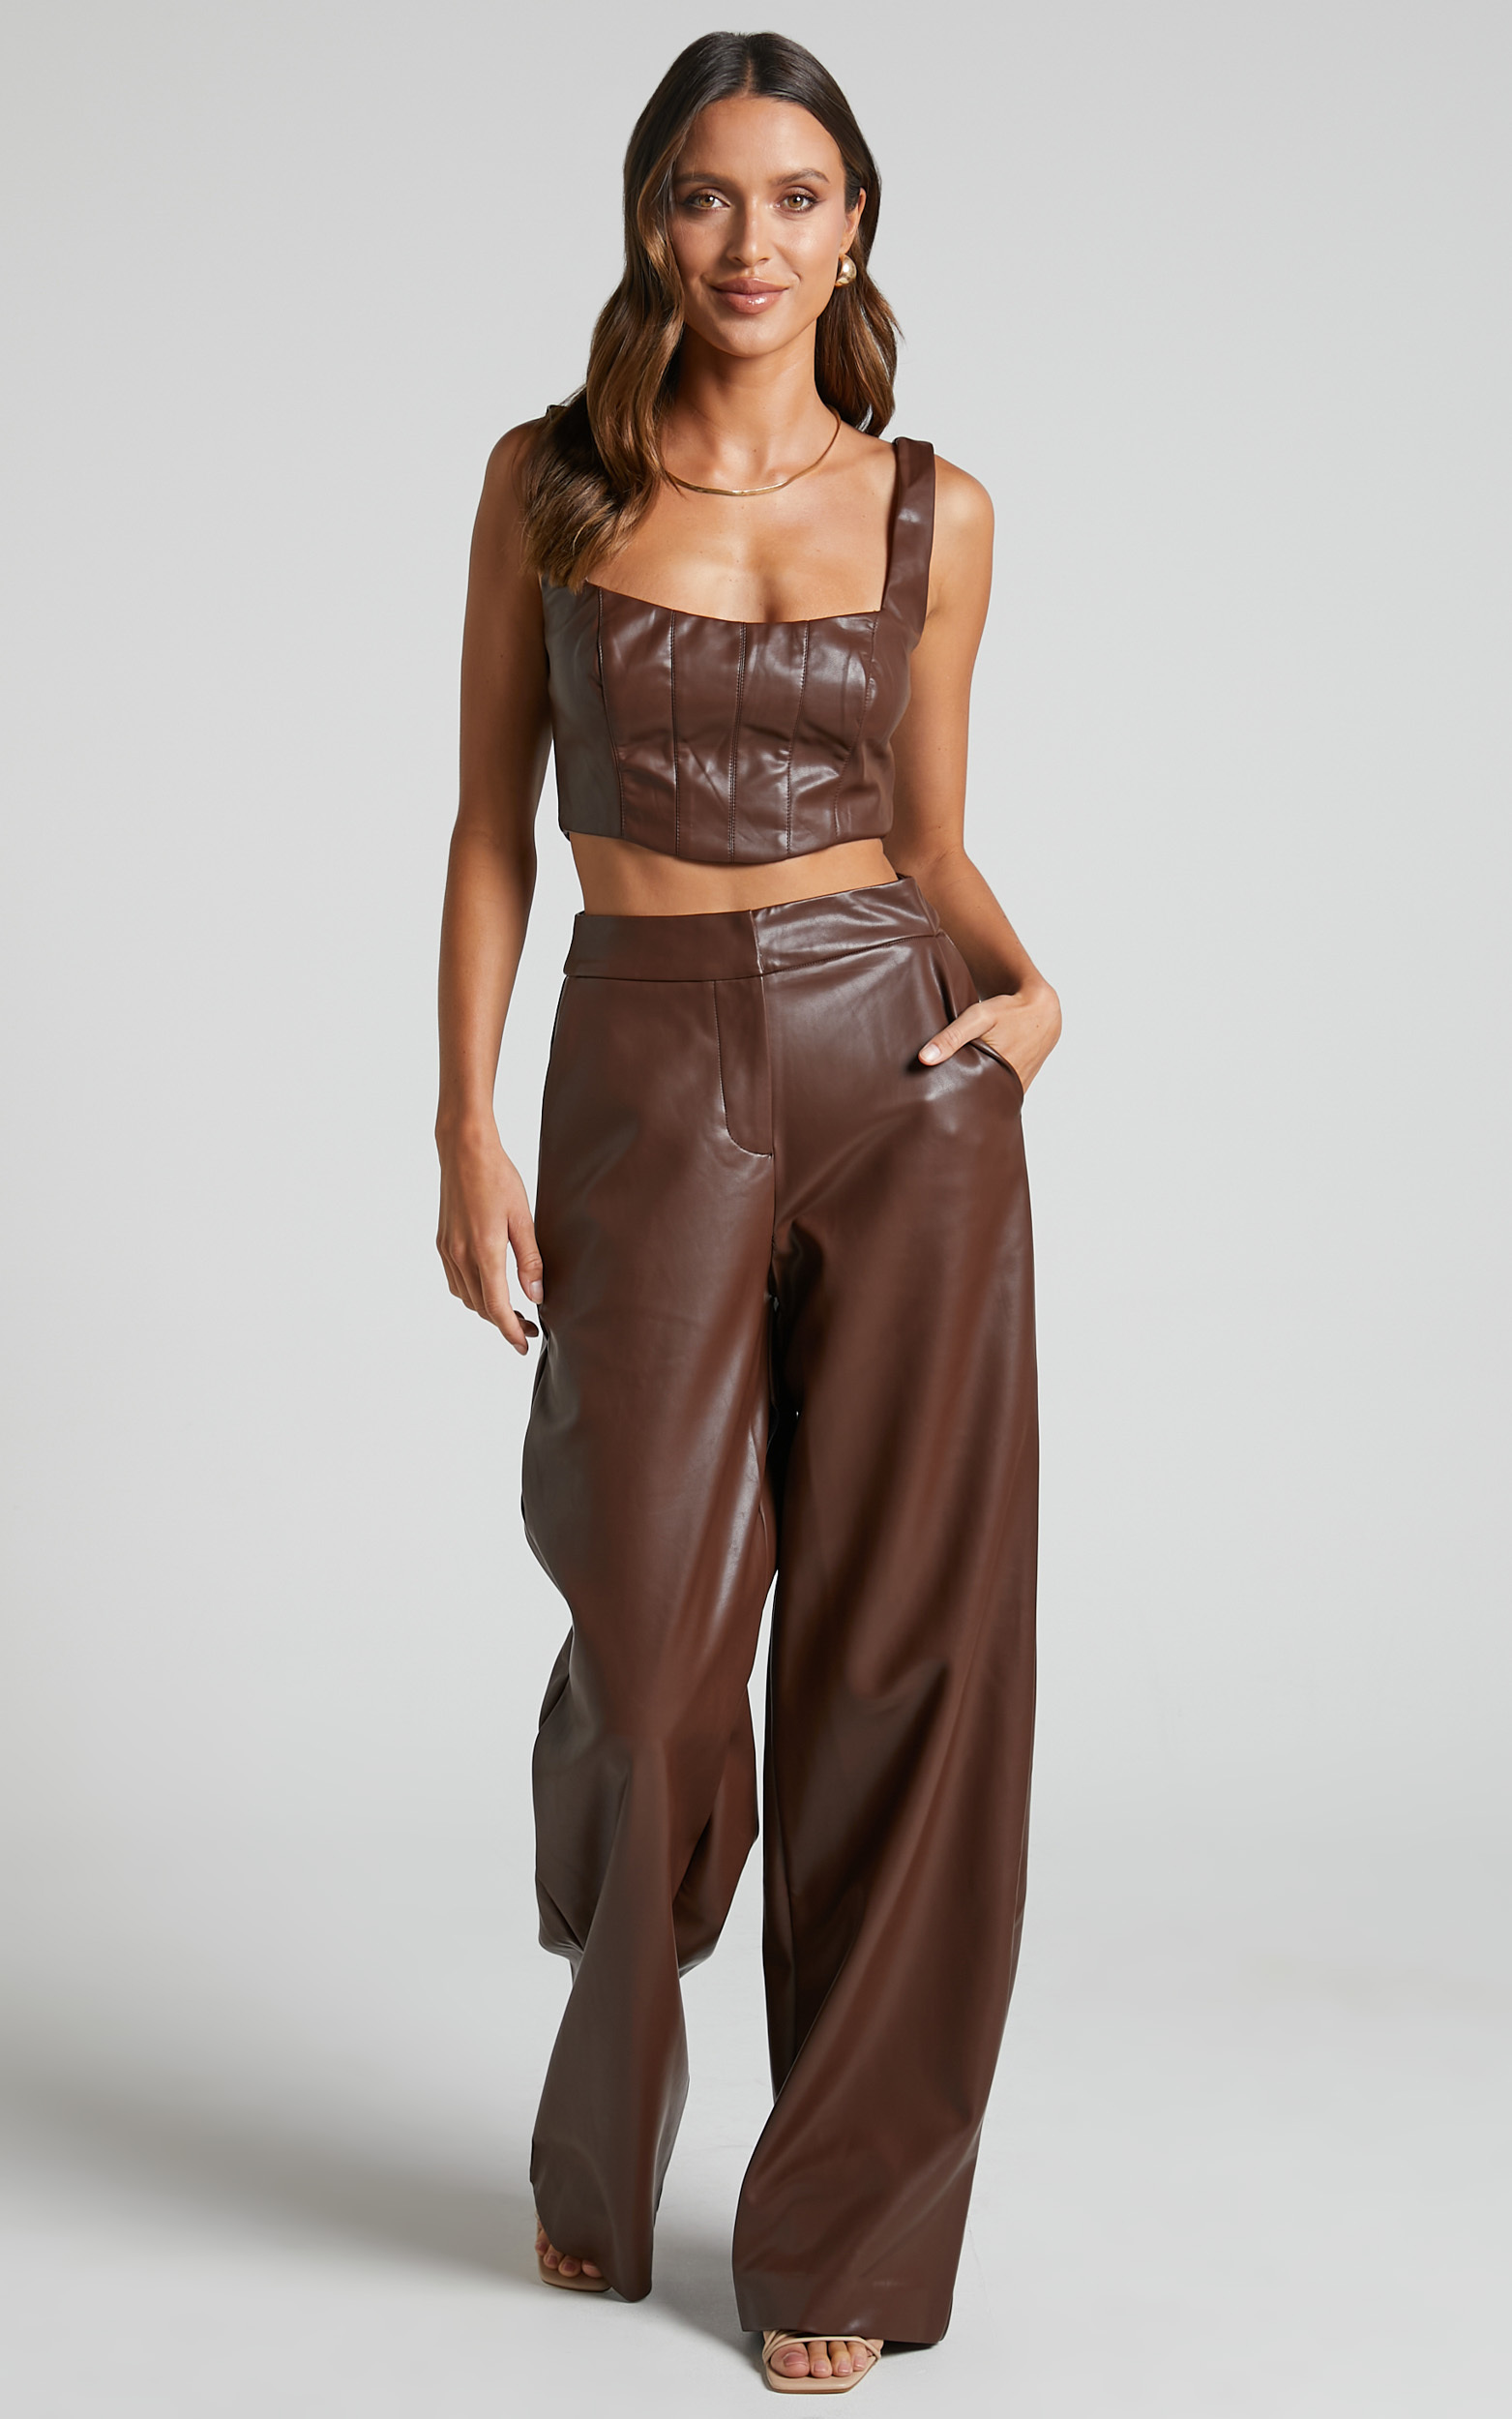 Minx - High Waisted Faux Leather Wide Leg Trousers in Chocolate - 04, BRN2, hi-res image number null